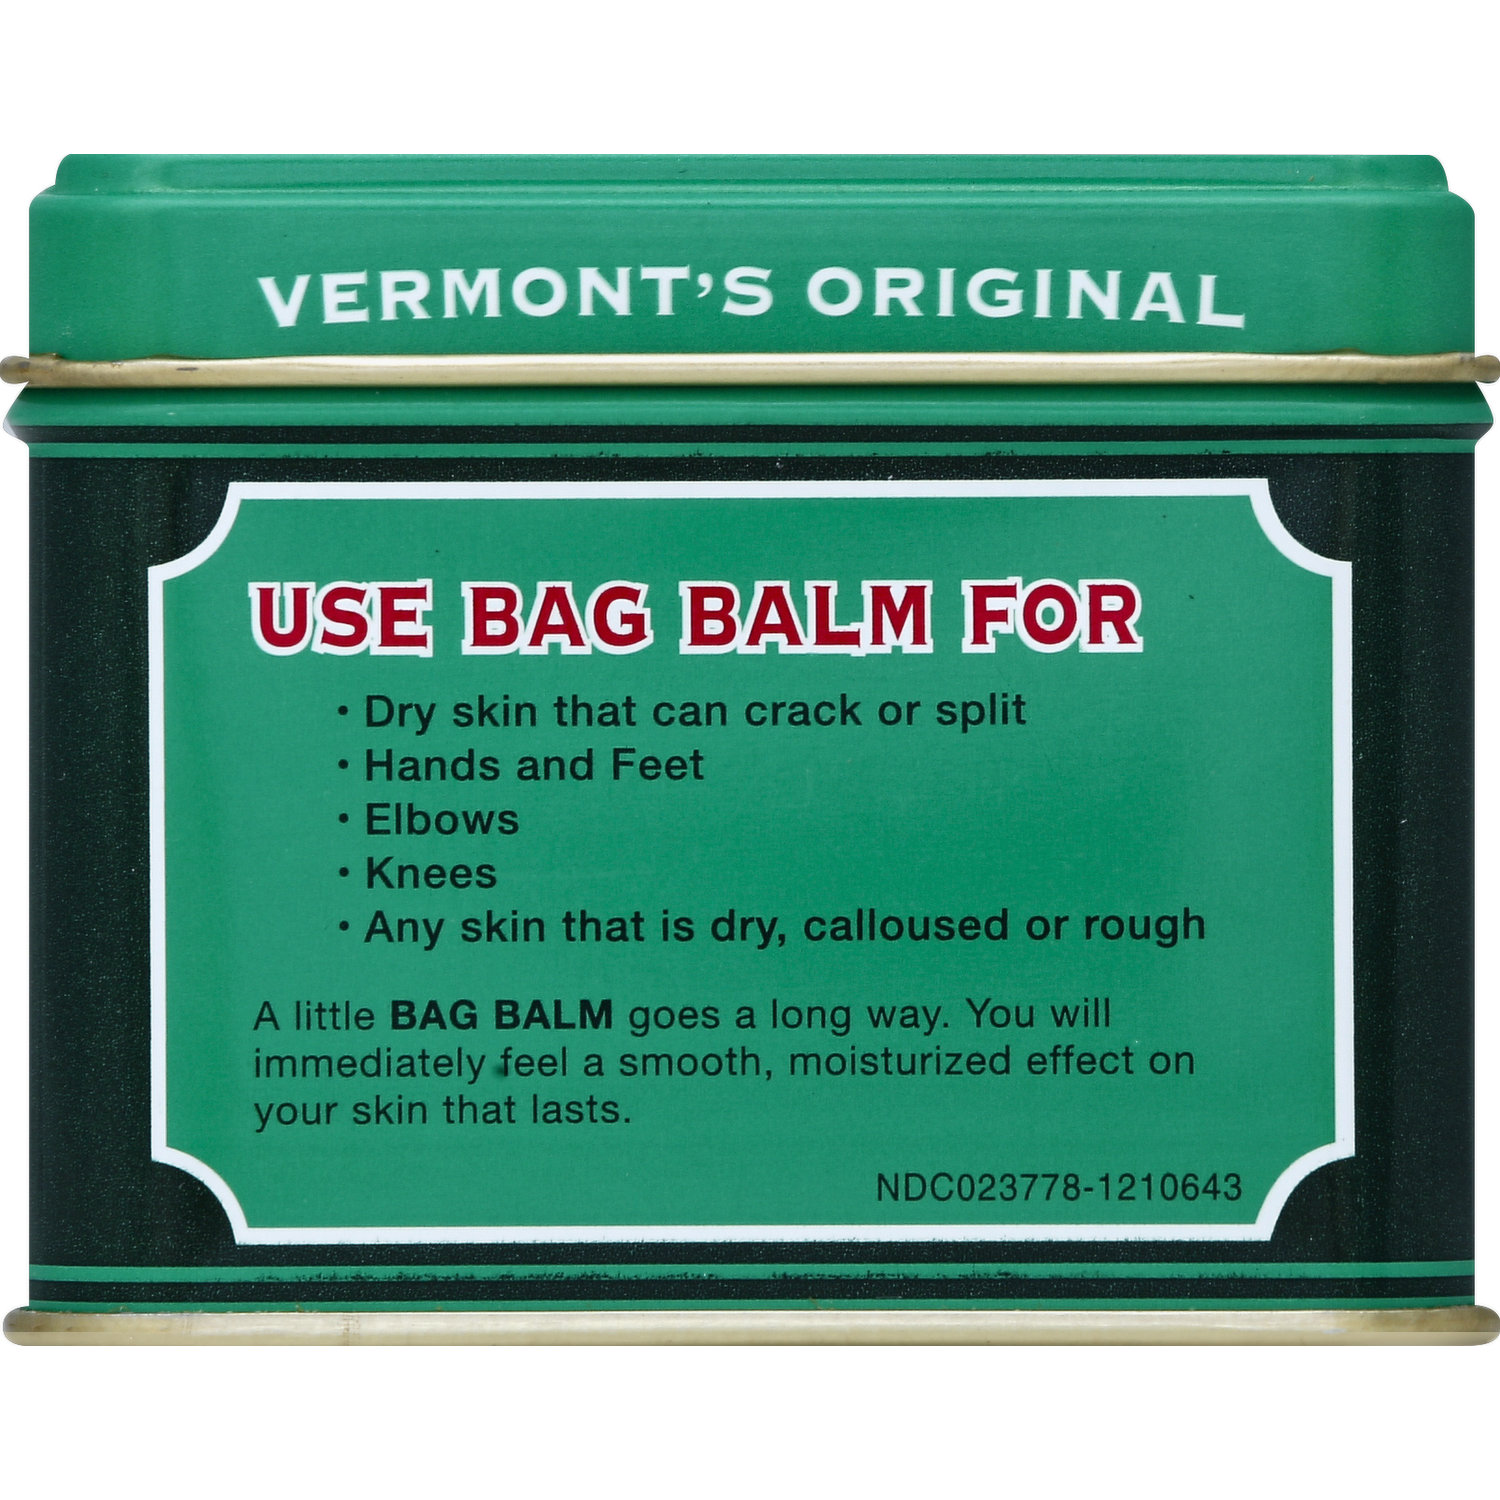 Chapped Lips? Bag Balm to the rescue.